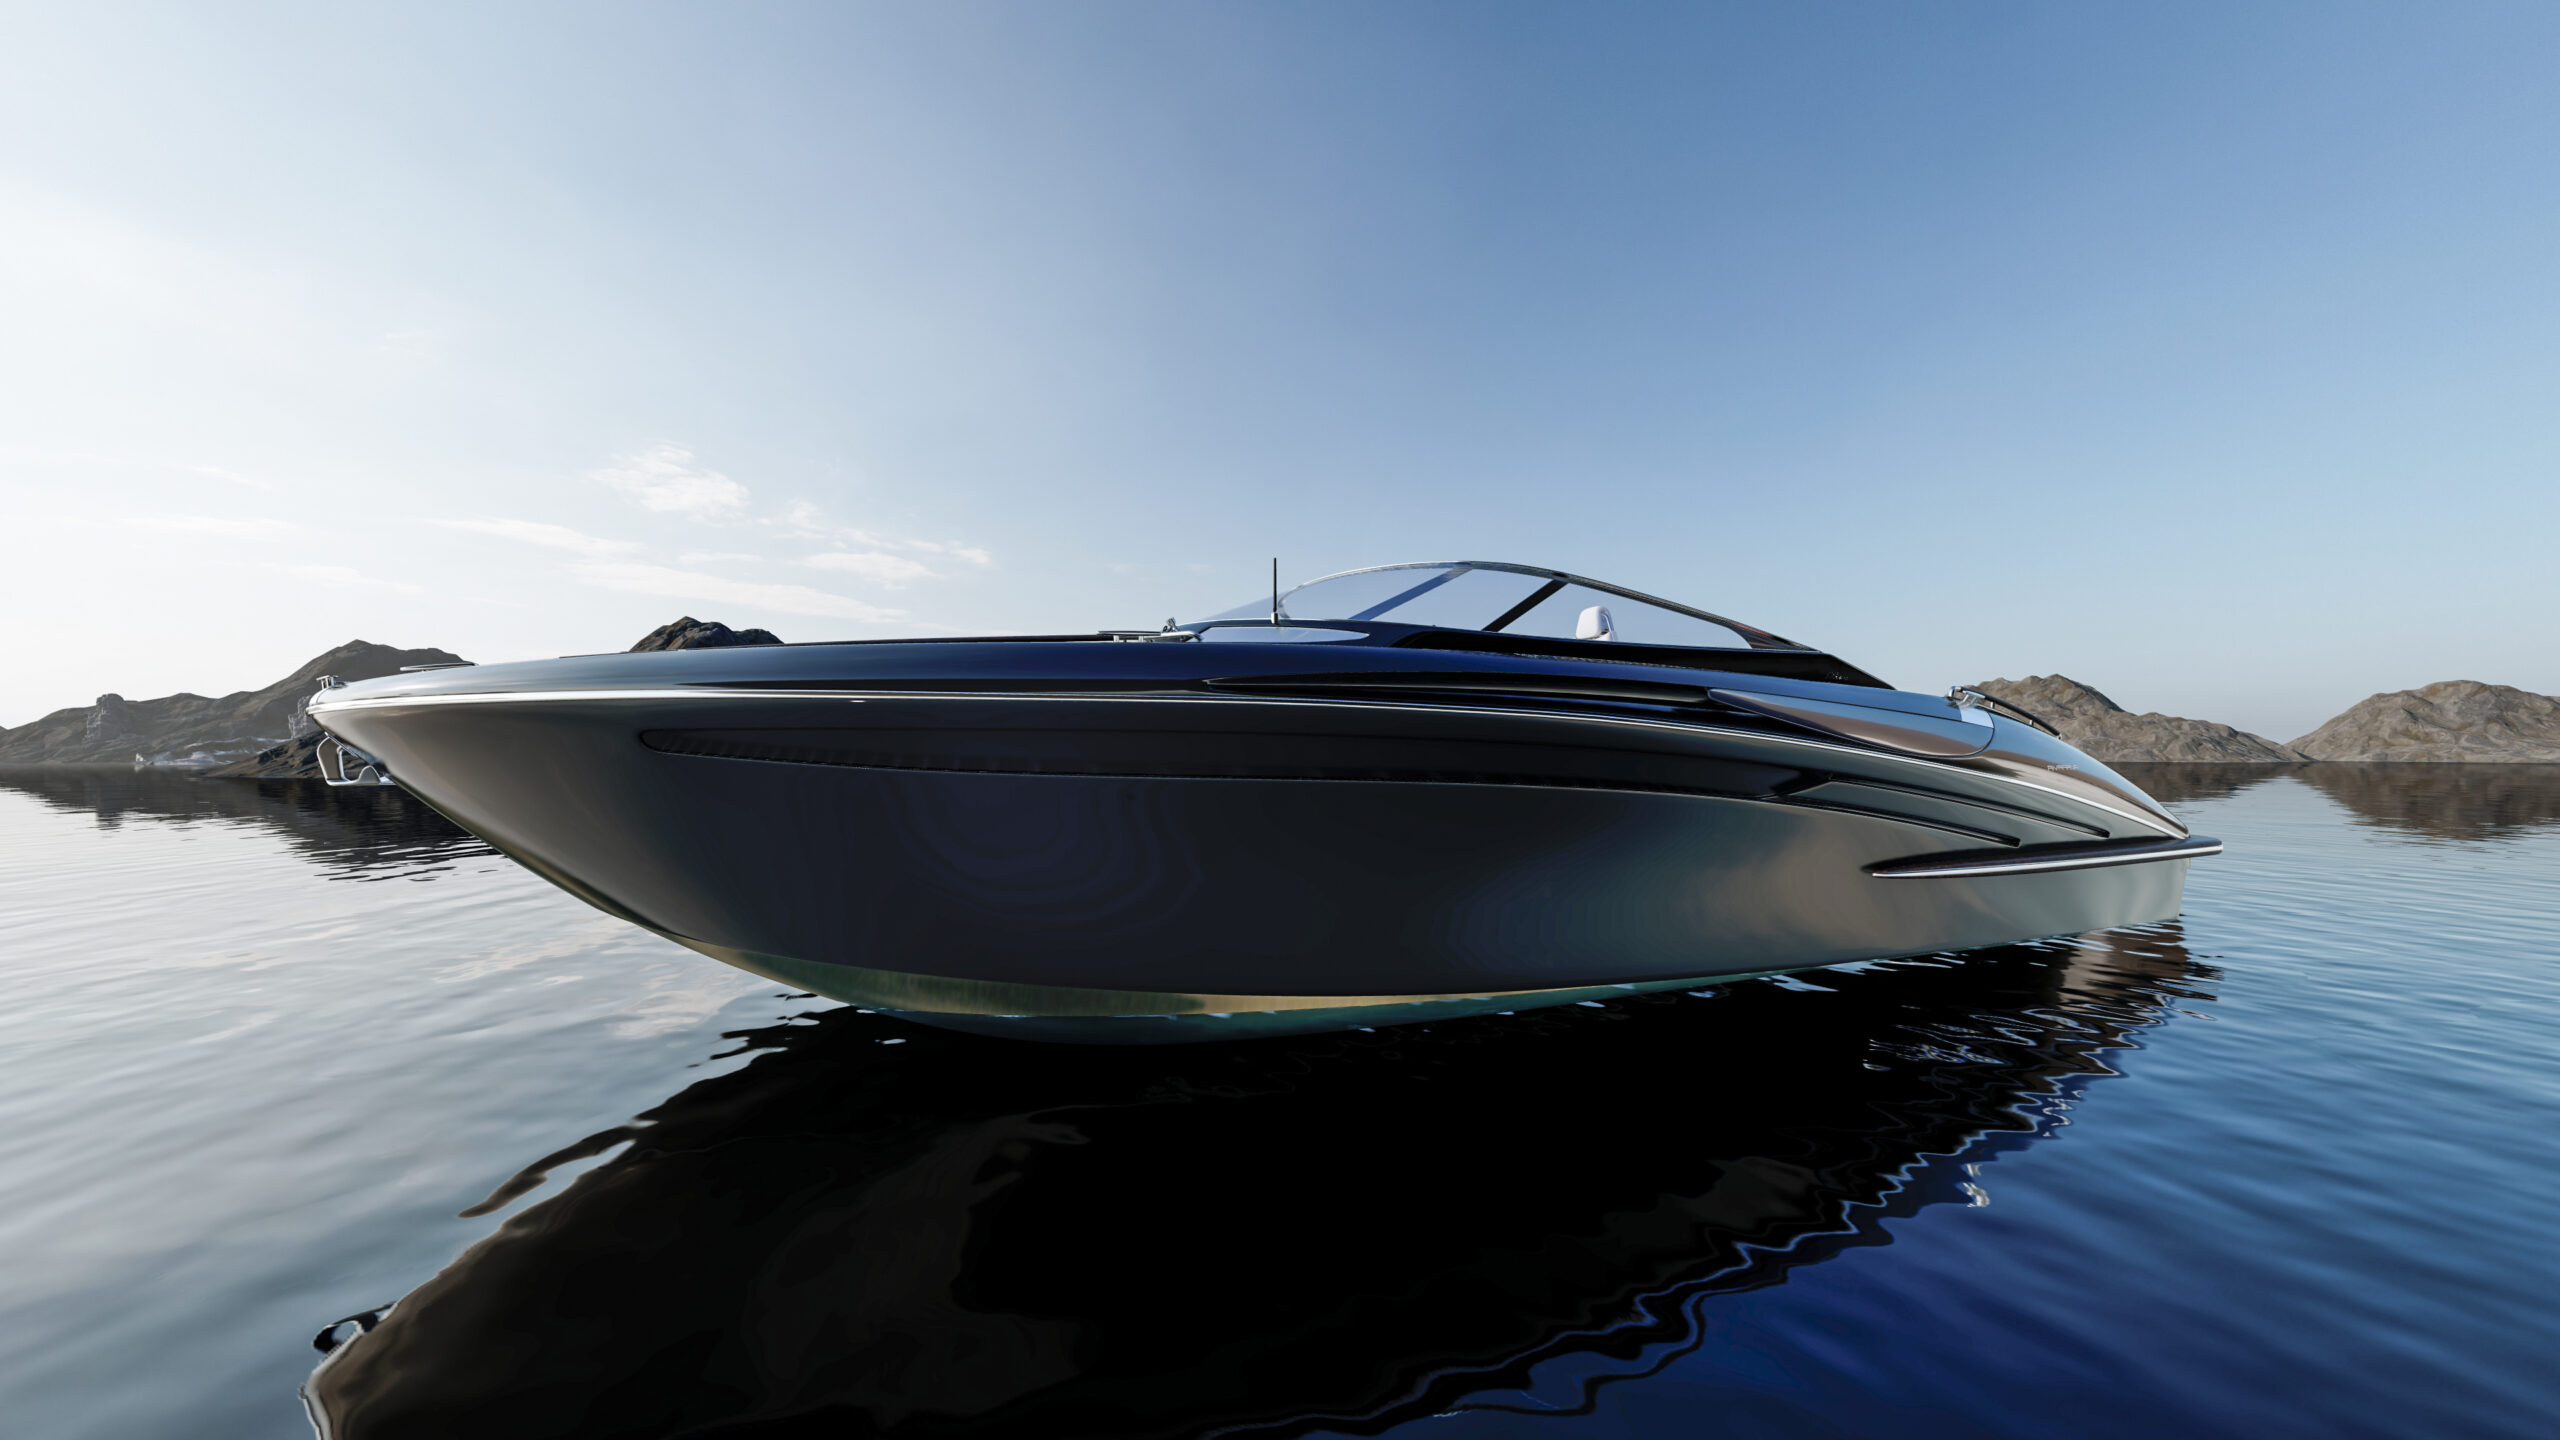 3D Yacht Rendering, Boat 3D Visualization, Visualizzazione Yacht/